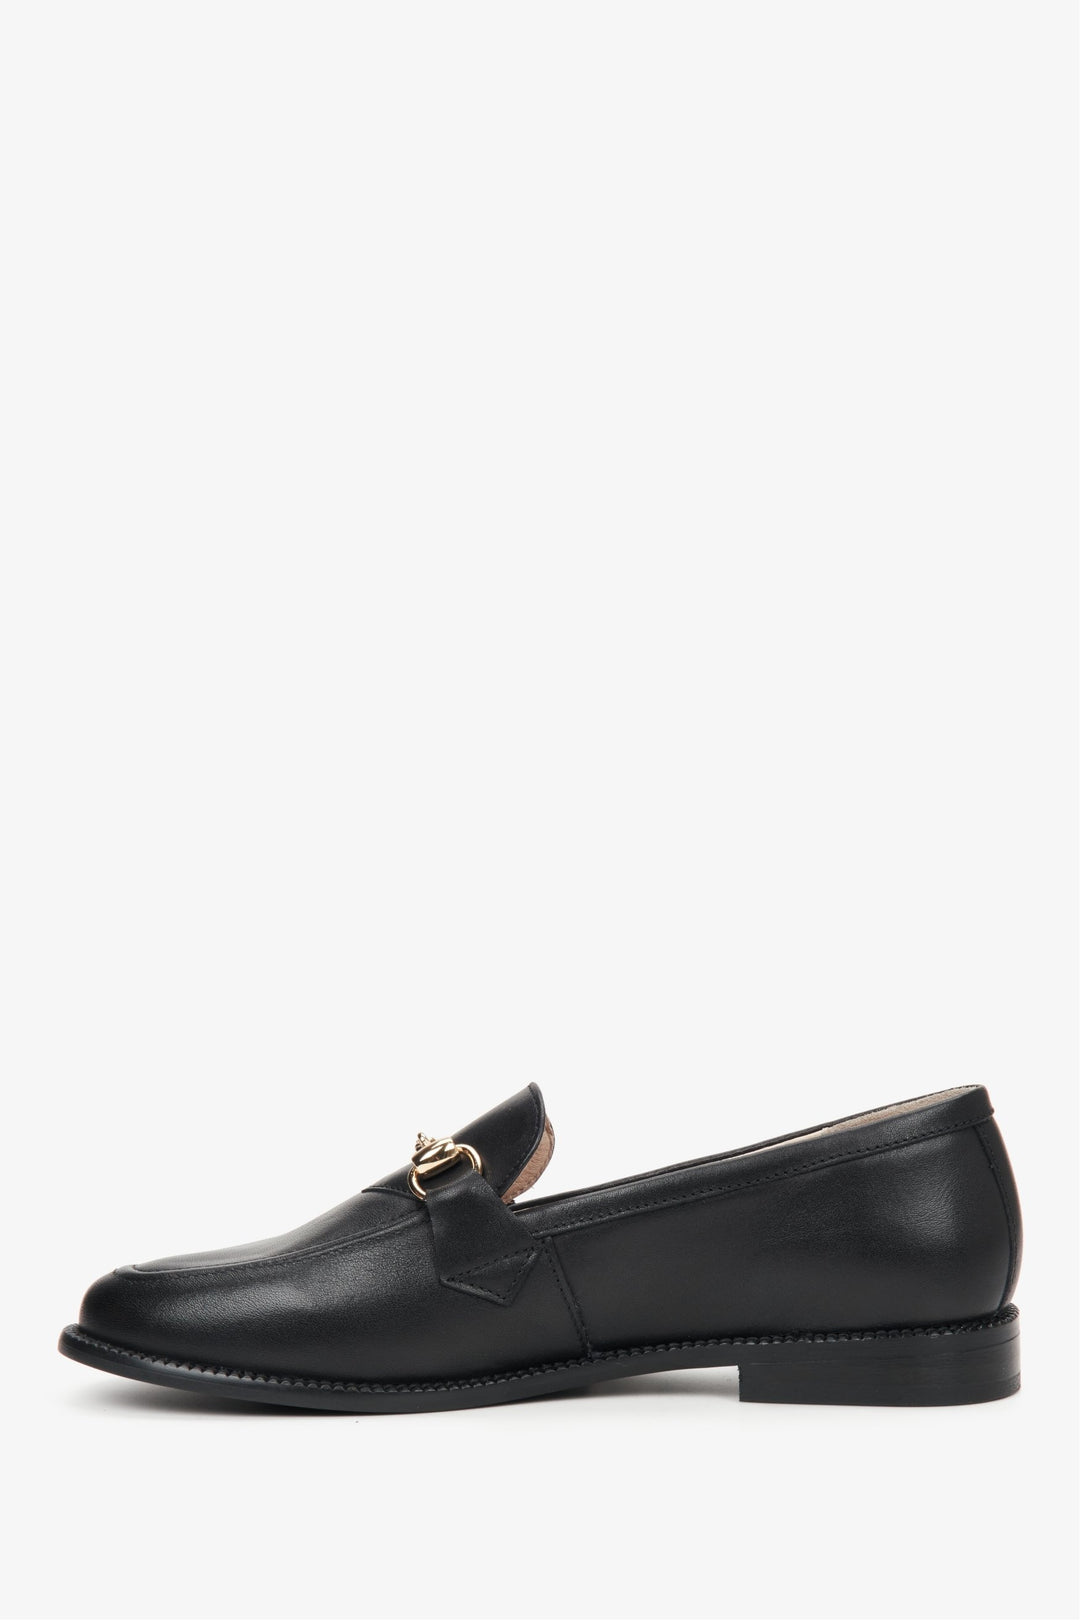 Black women's Italian leather loafers with gold buckle - shoe side.